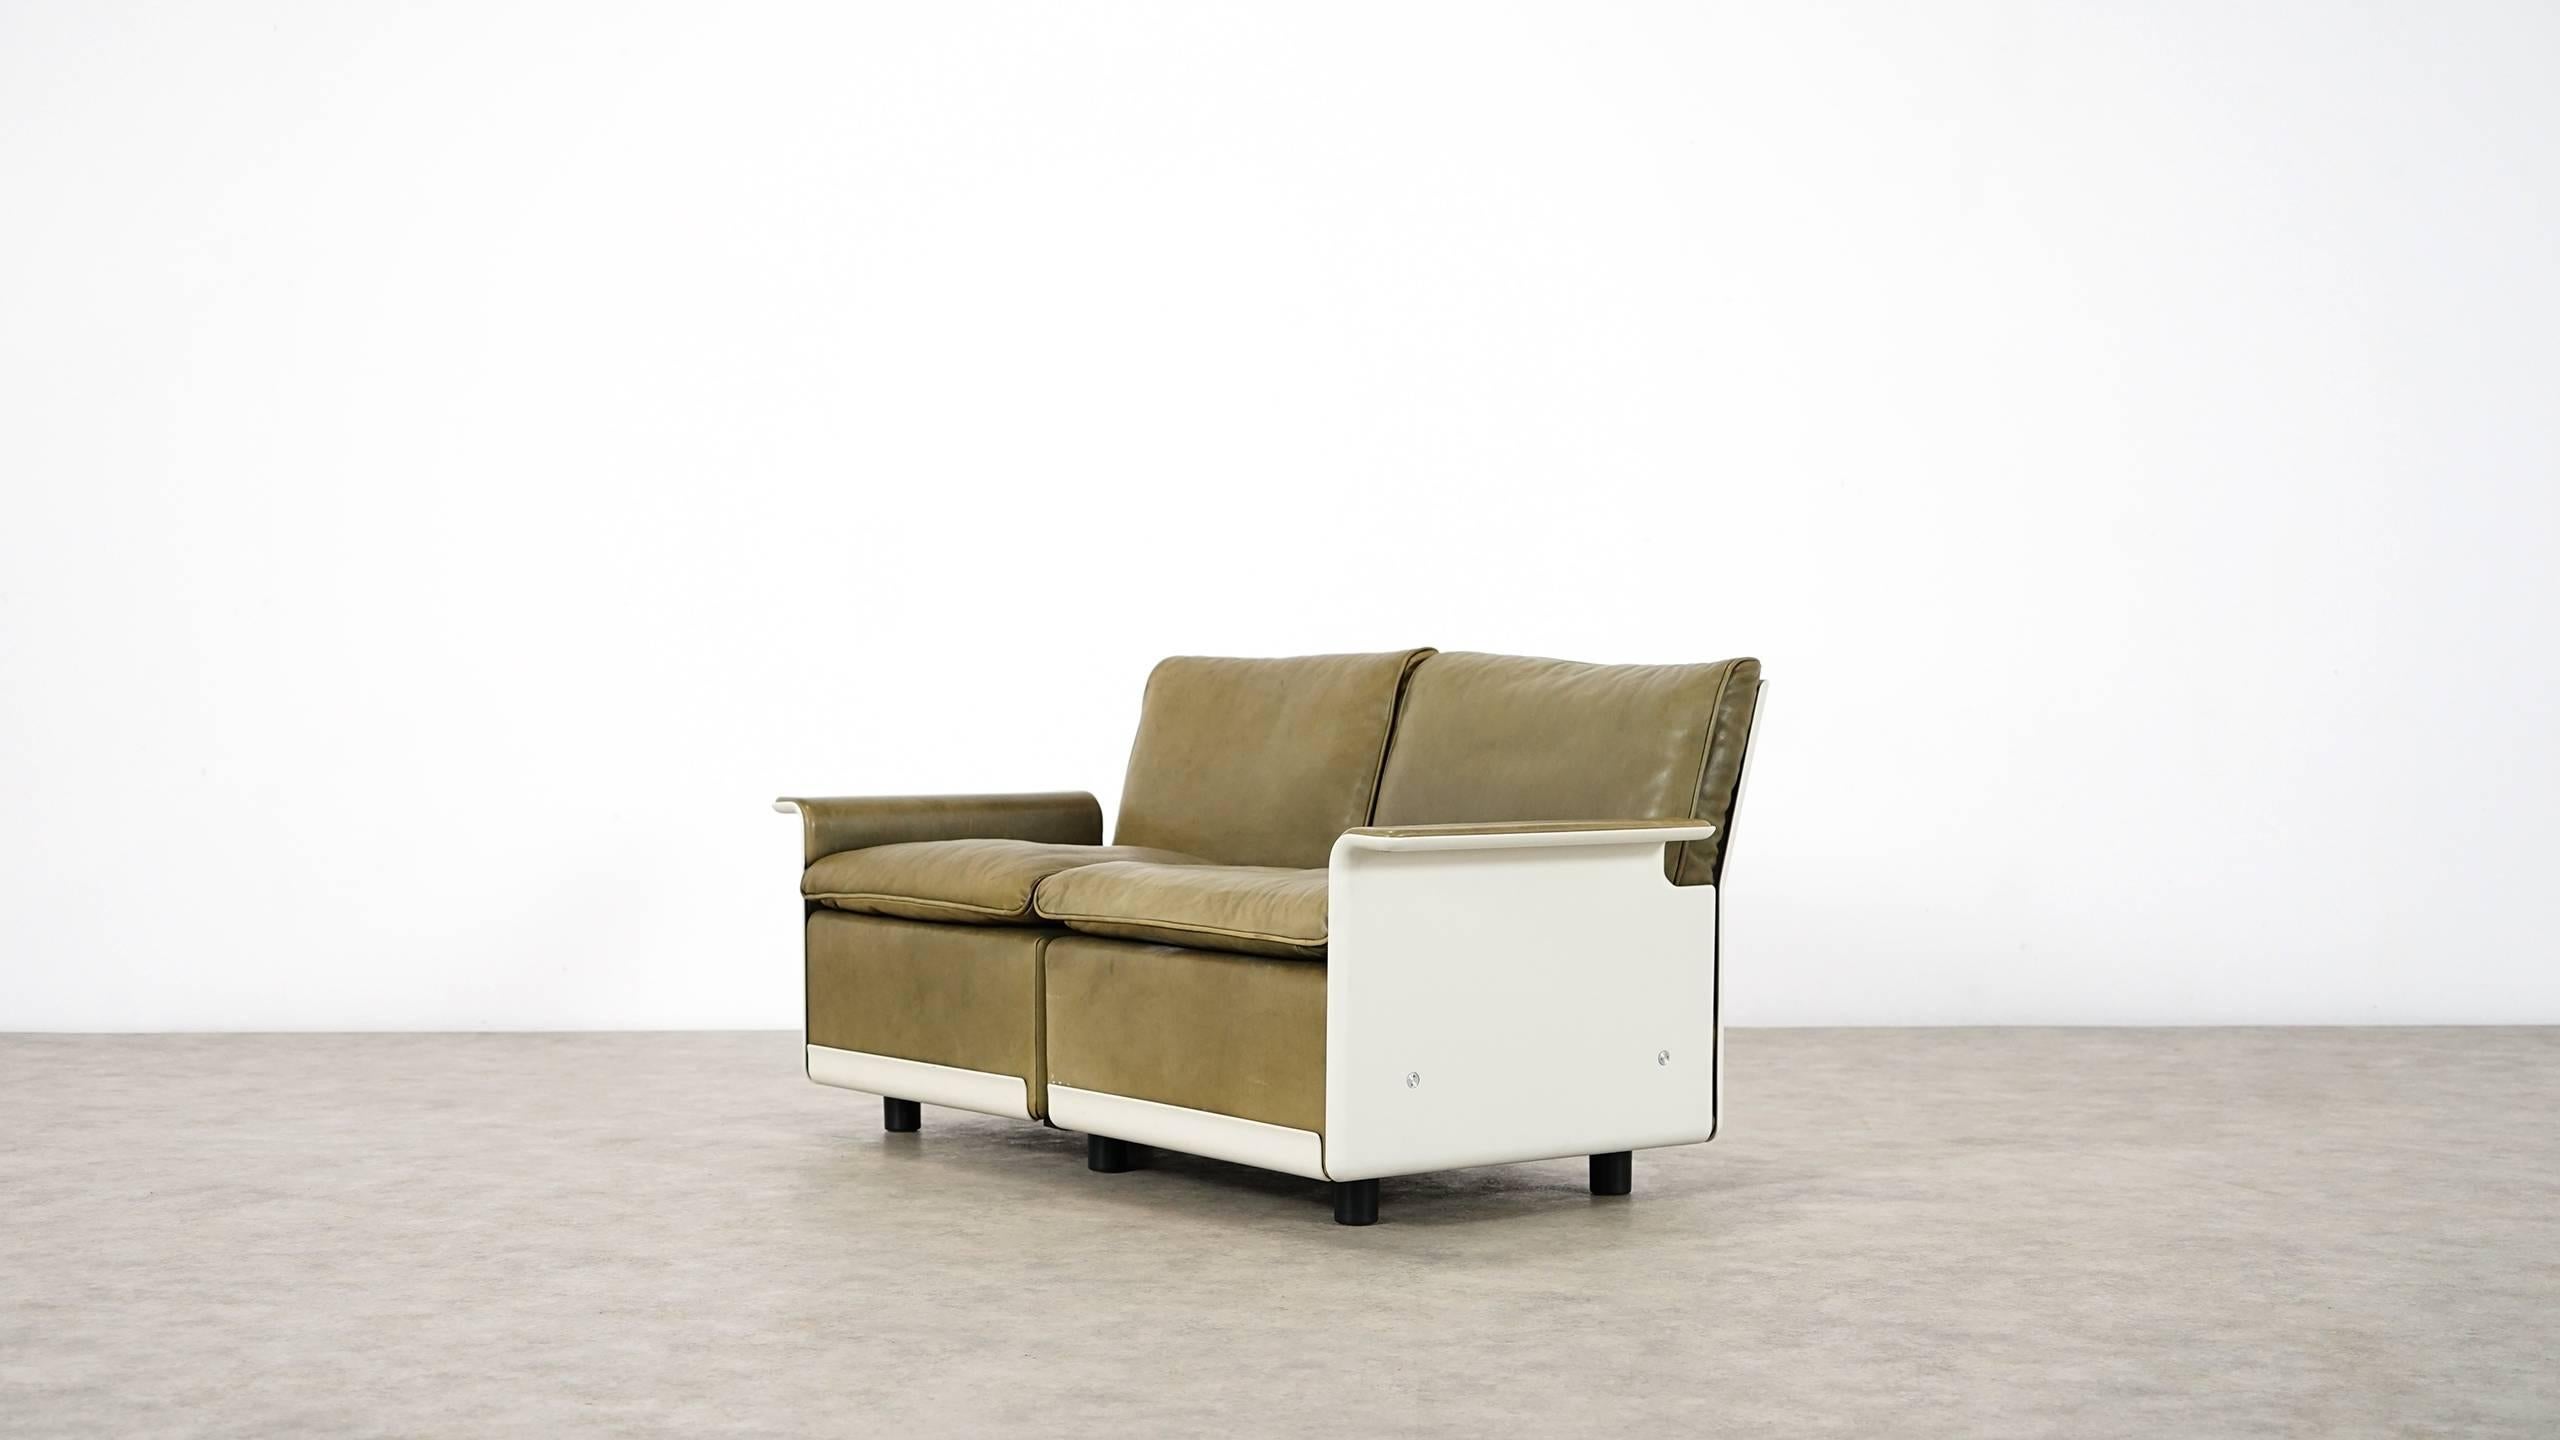 Mid-Century Modern Dieter Rams, Sofa RZ 62 in Olivgreen Leather by Vitsœ, Two-Seat